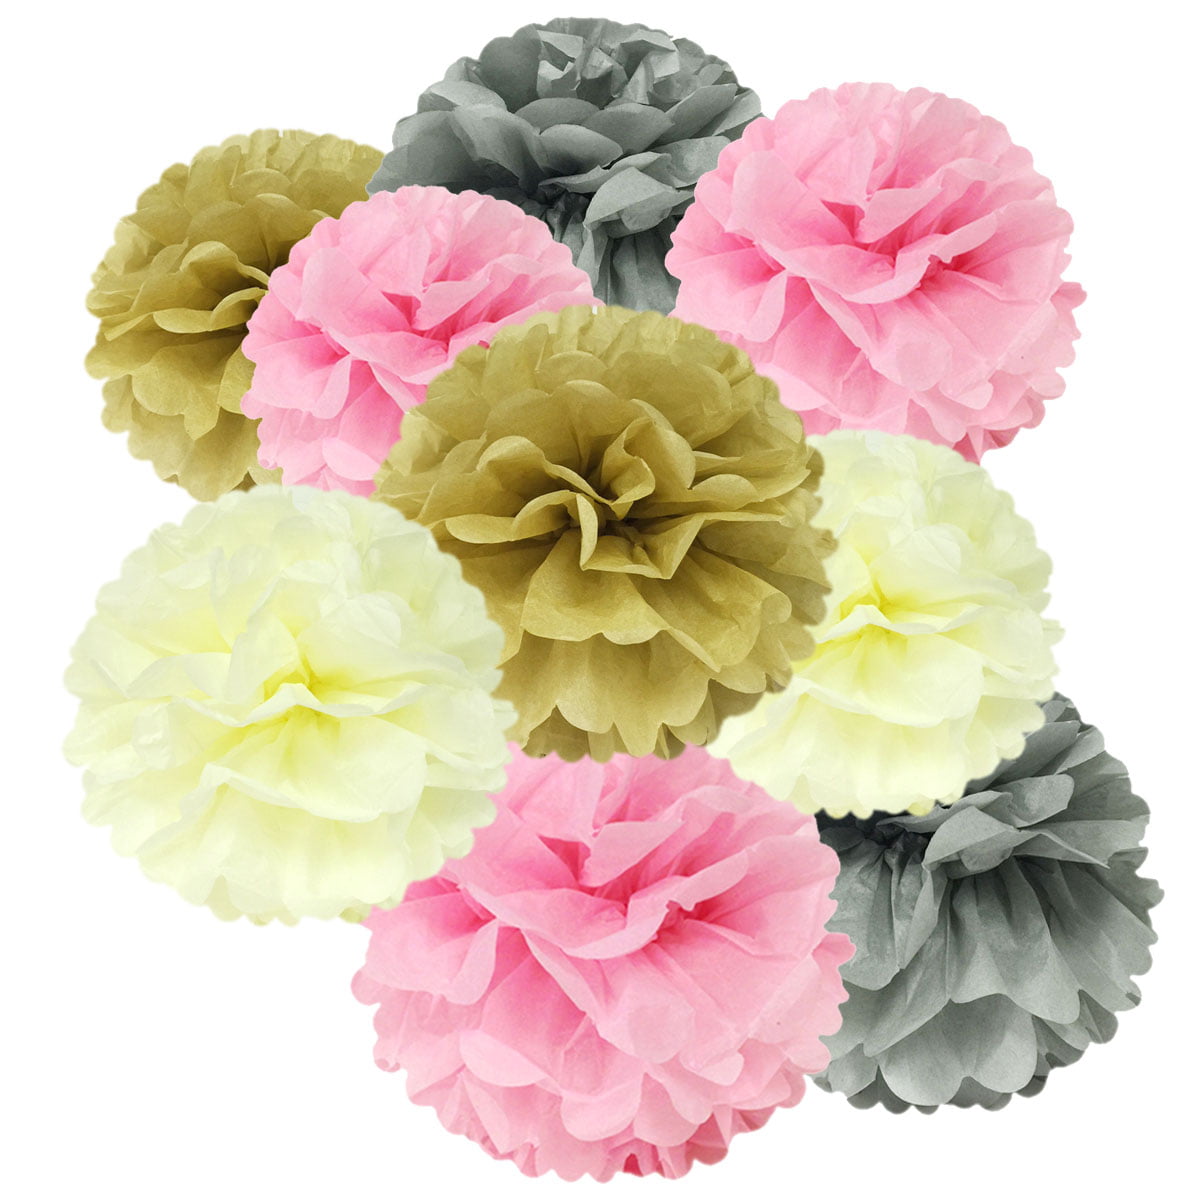 Details about   Tissue Pom Poms Paper Home Wedding Birthday Party Champagne Decorations pompoms